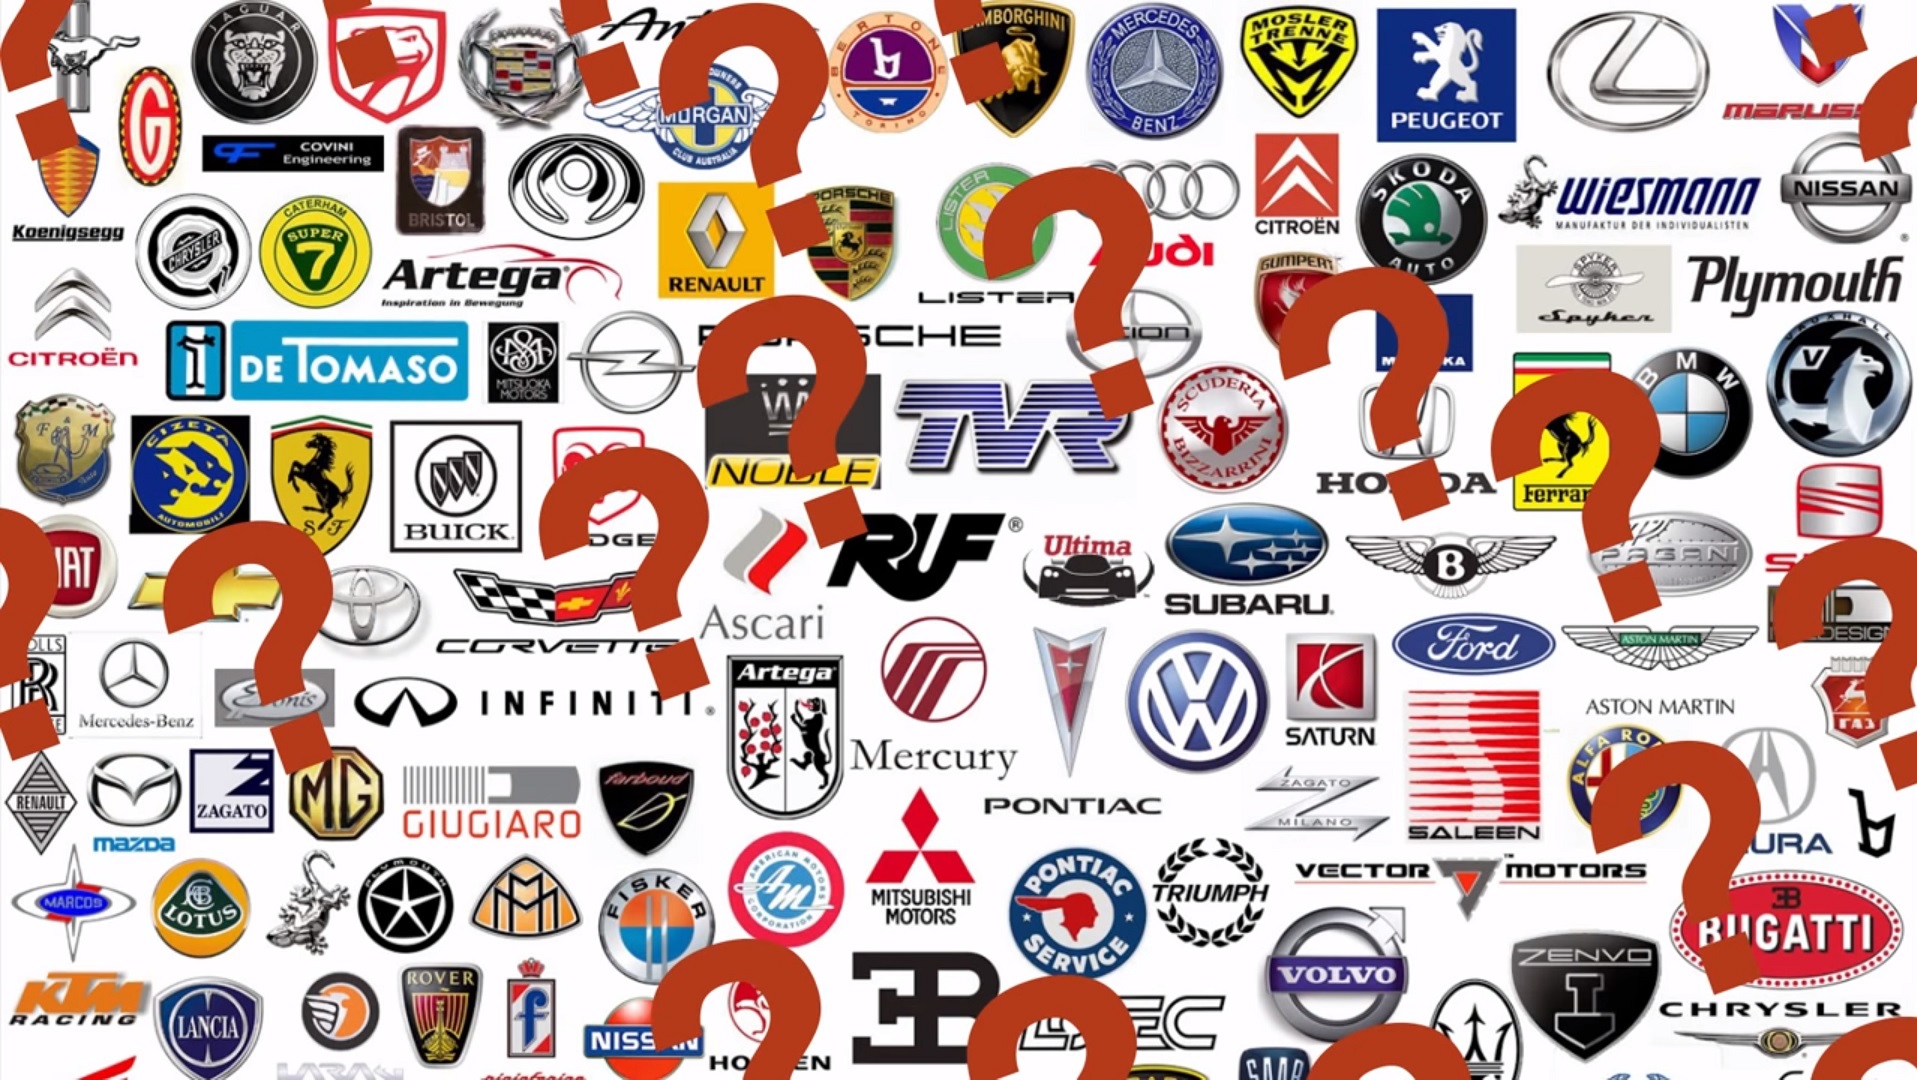 Car Logos Explained: What These 9 Symbols Really Mean